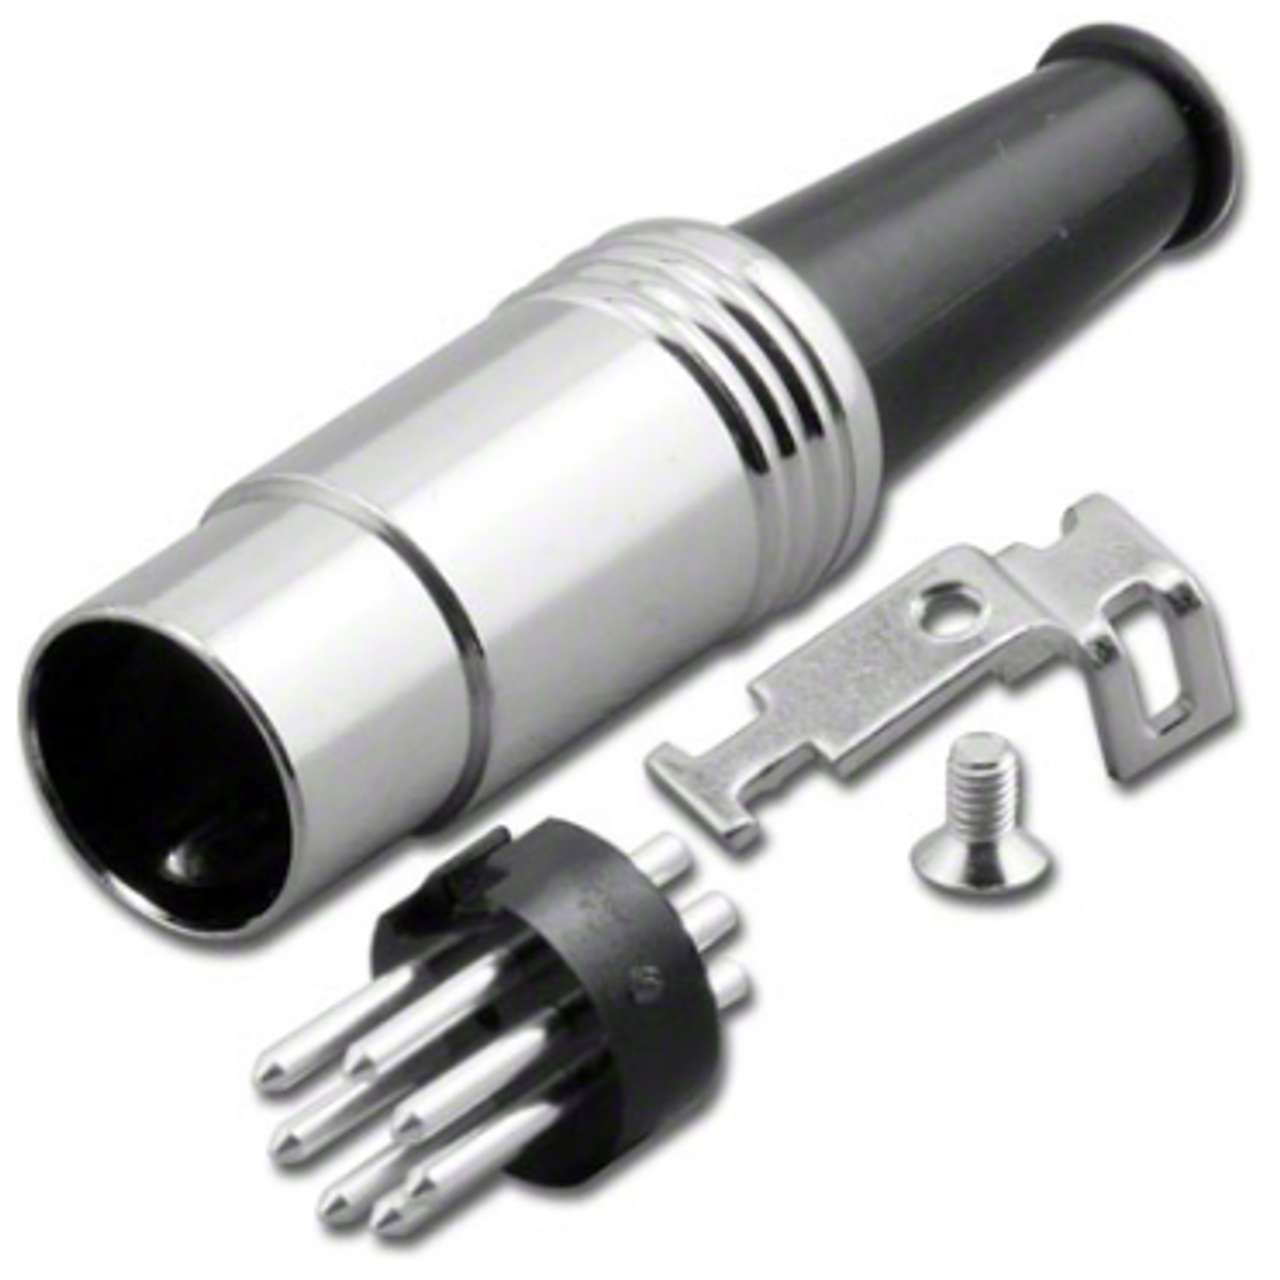 8-Pin - Standard DIN Plug Connector with Metal Shell